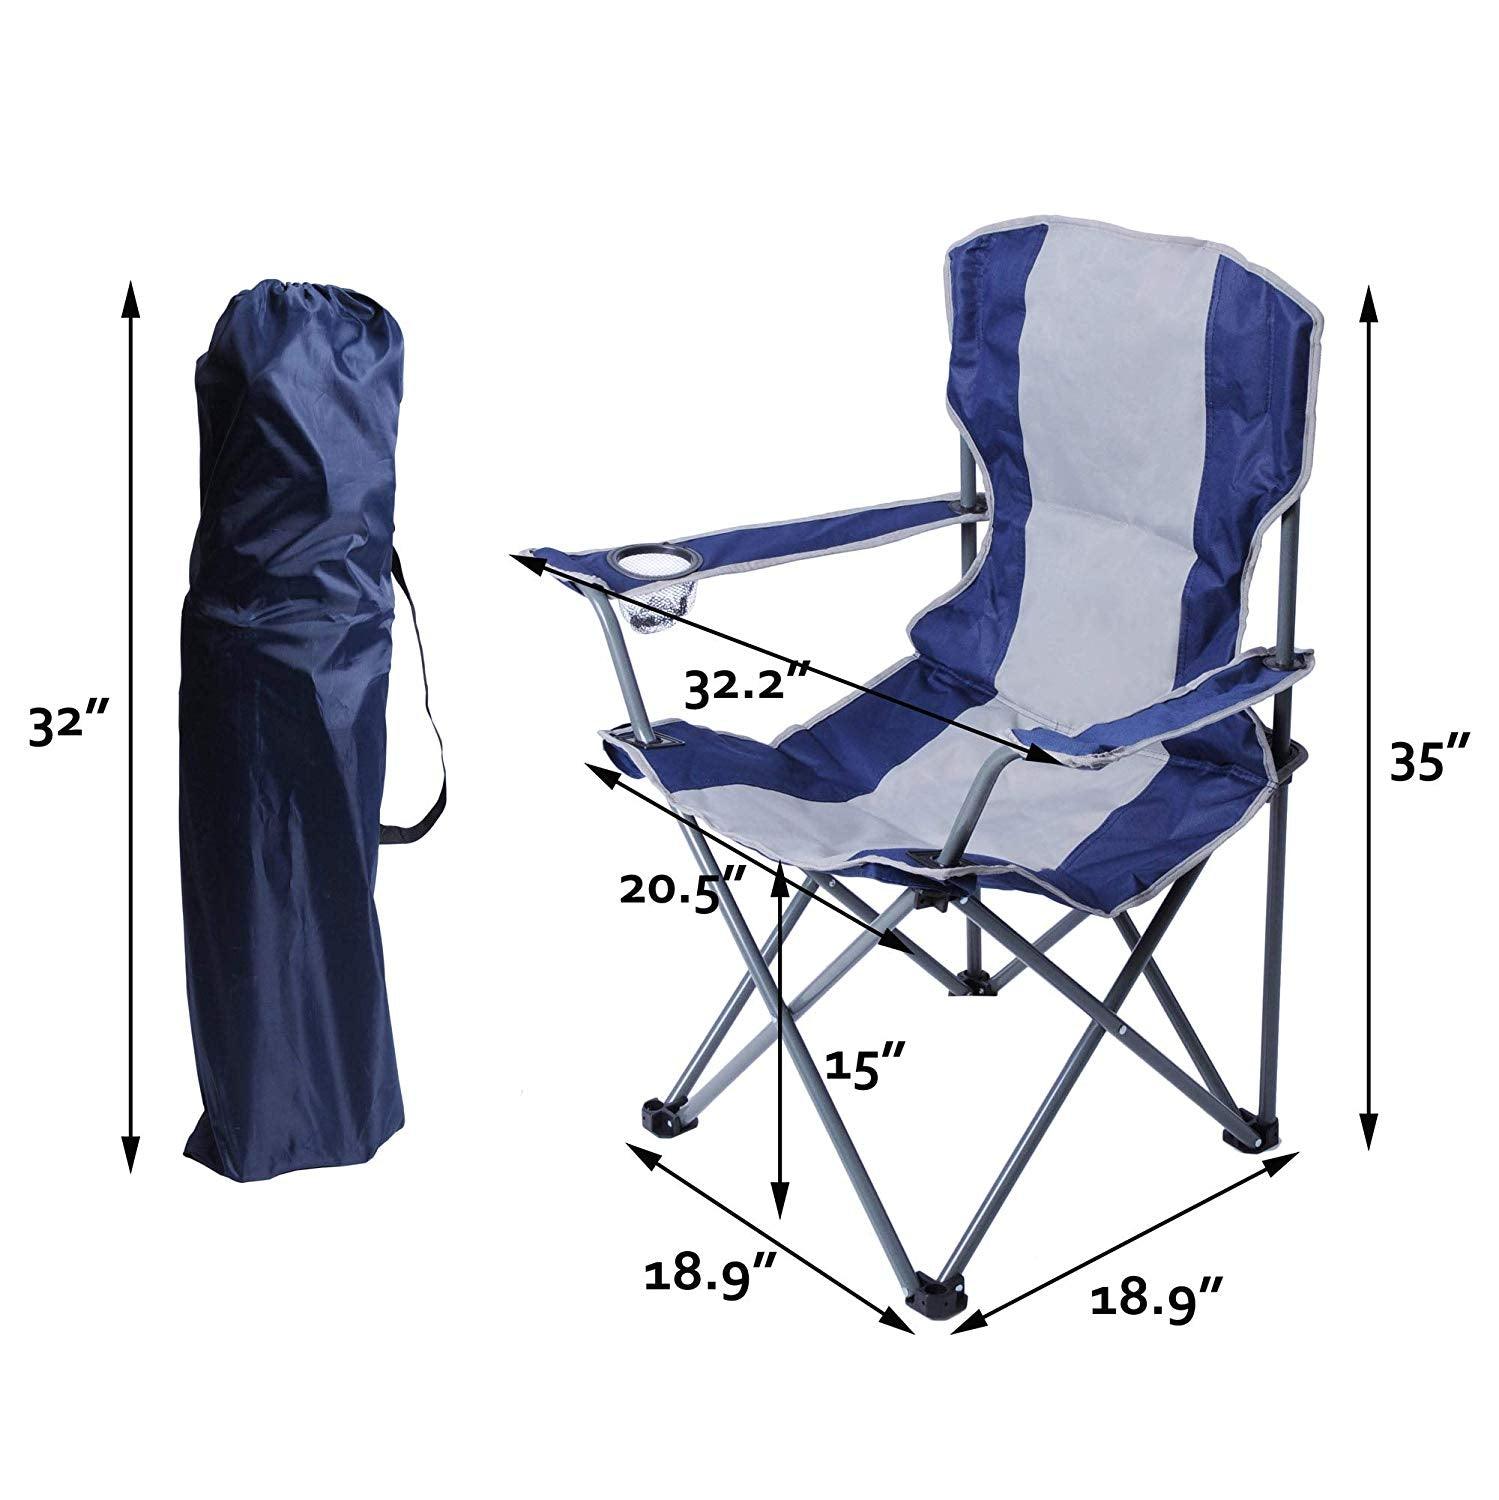 Bosonshop Canopy Camping Chair Folding Durable Outdoor Patio Seat with Cup Holder